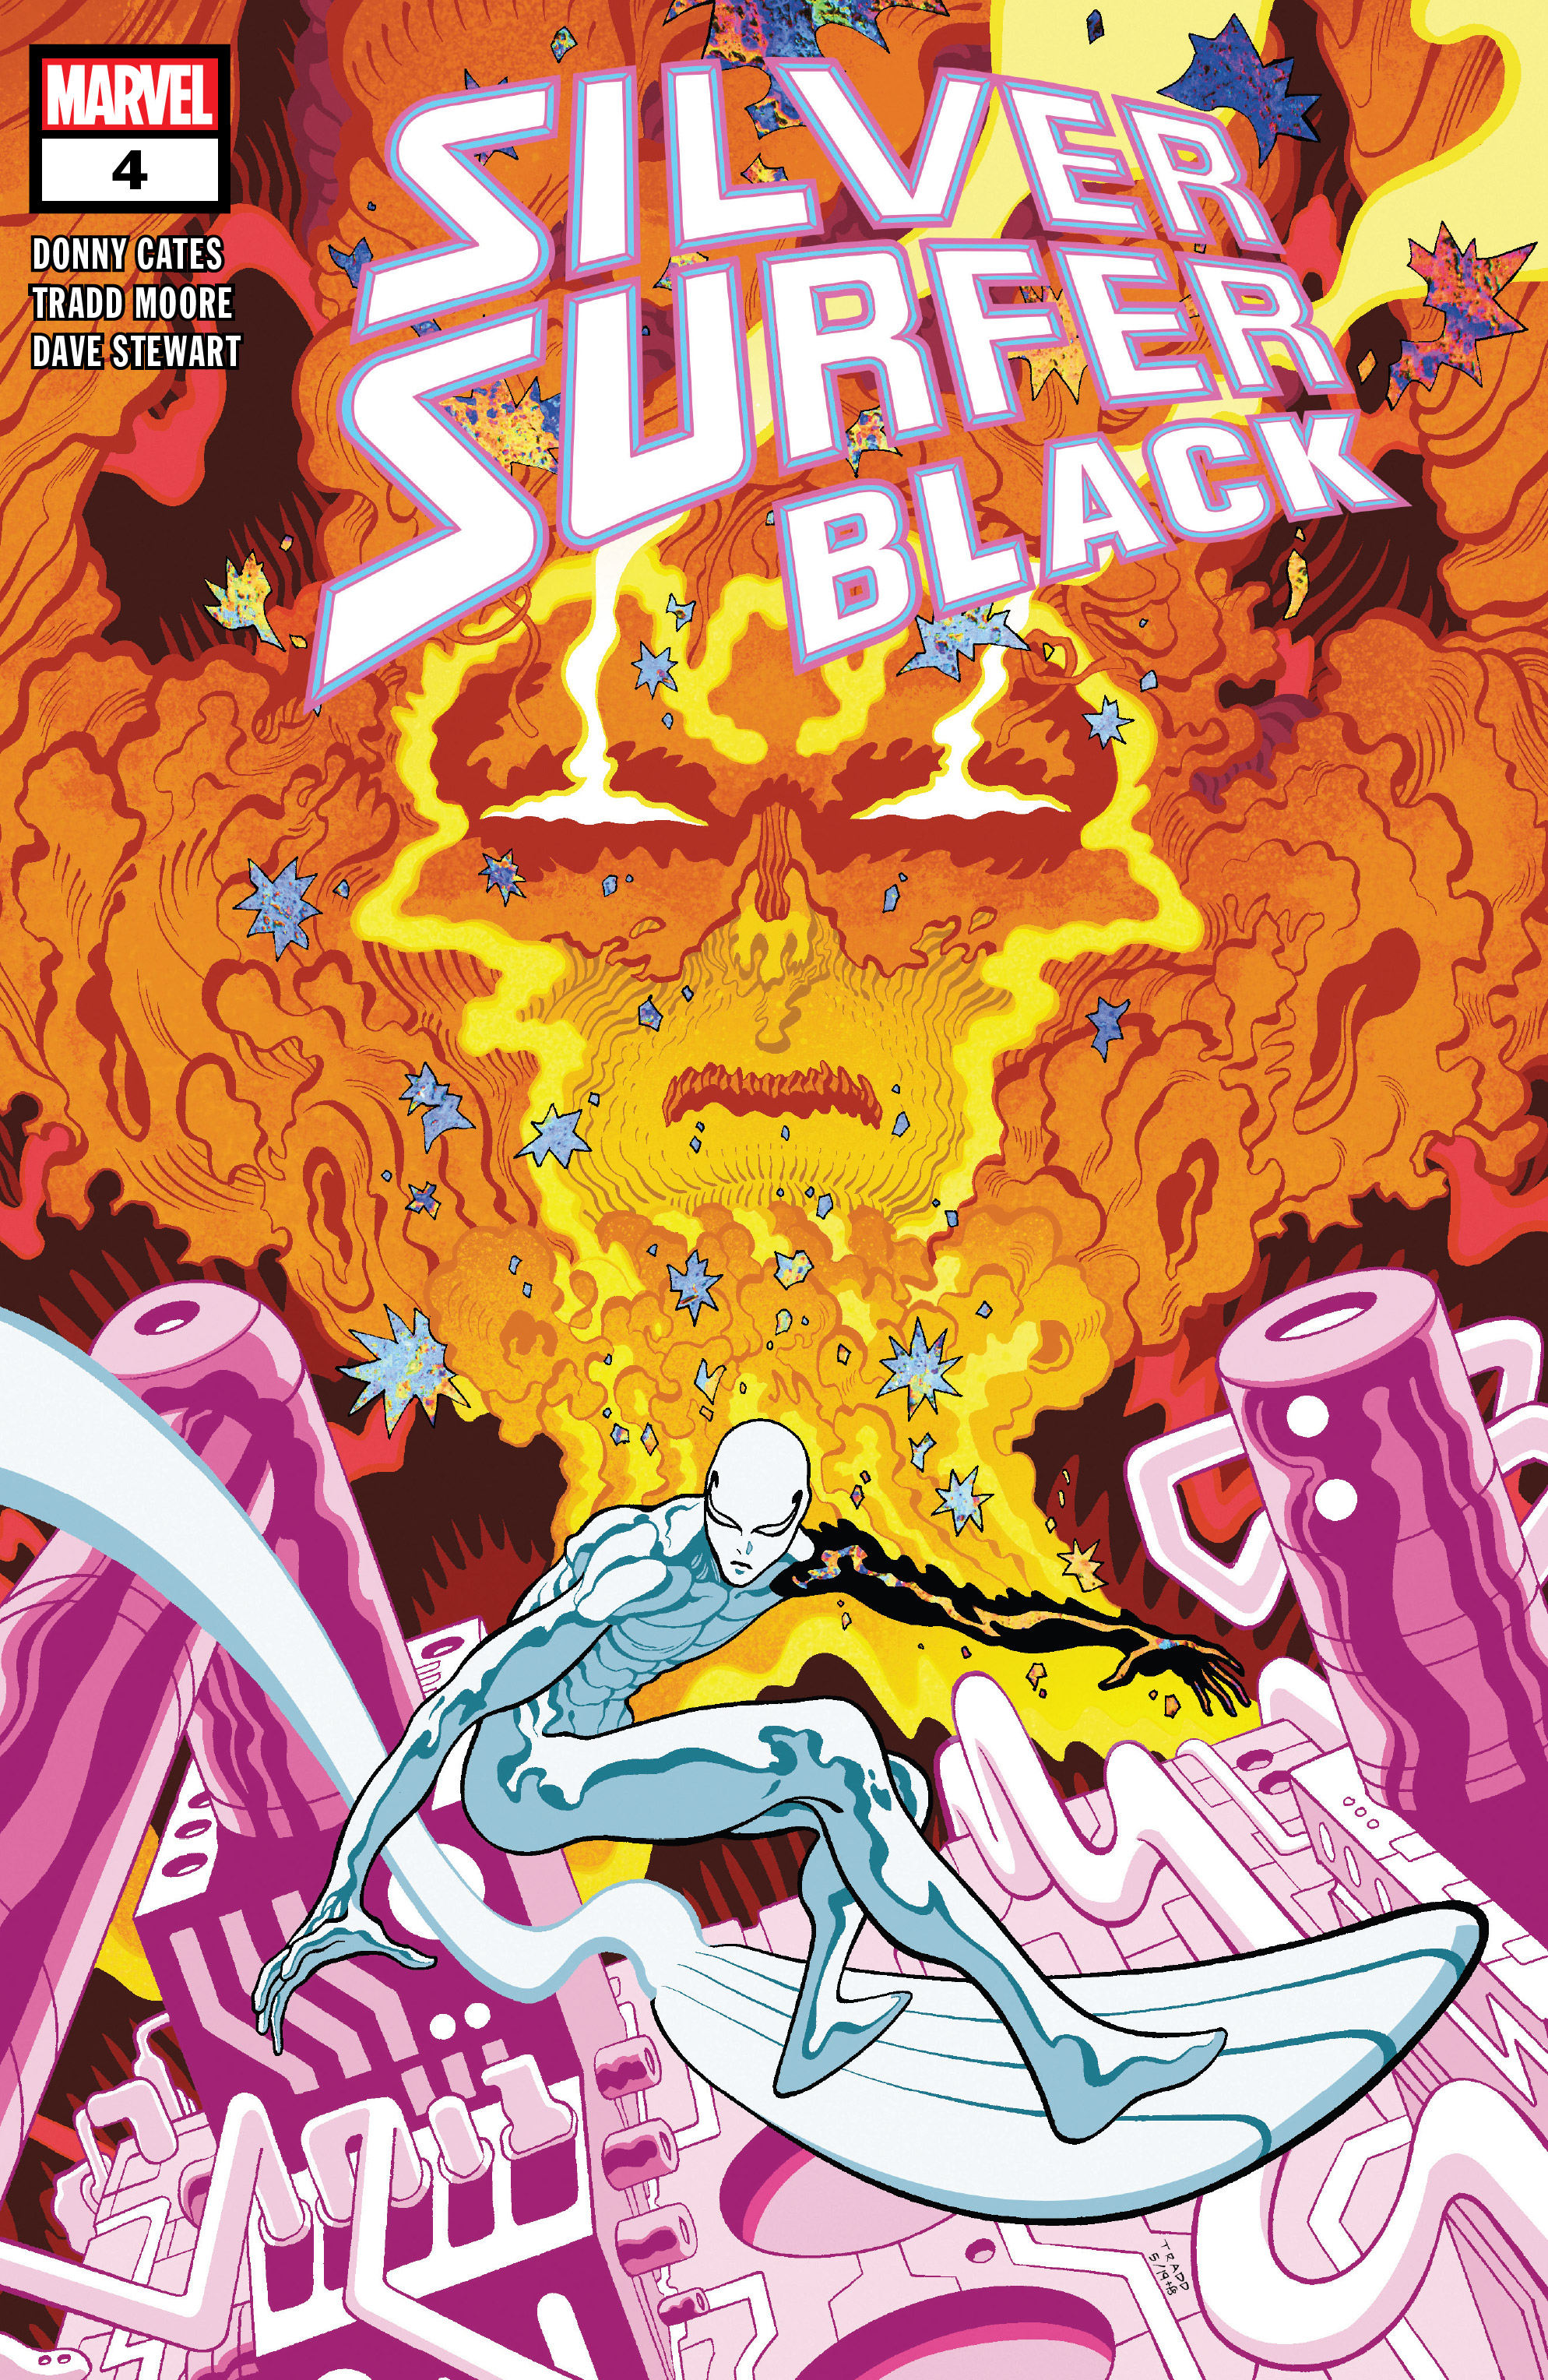 Read online Silver Surfer: Black comic -  Issue #4 - 1